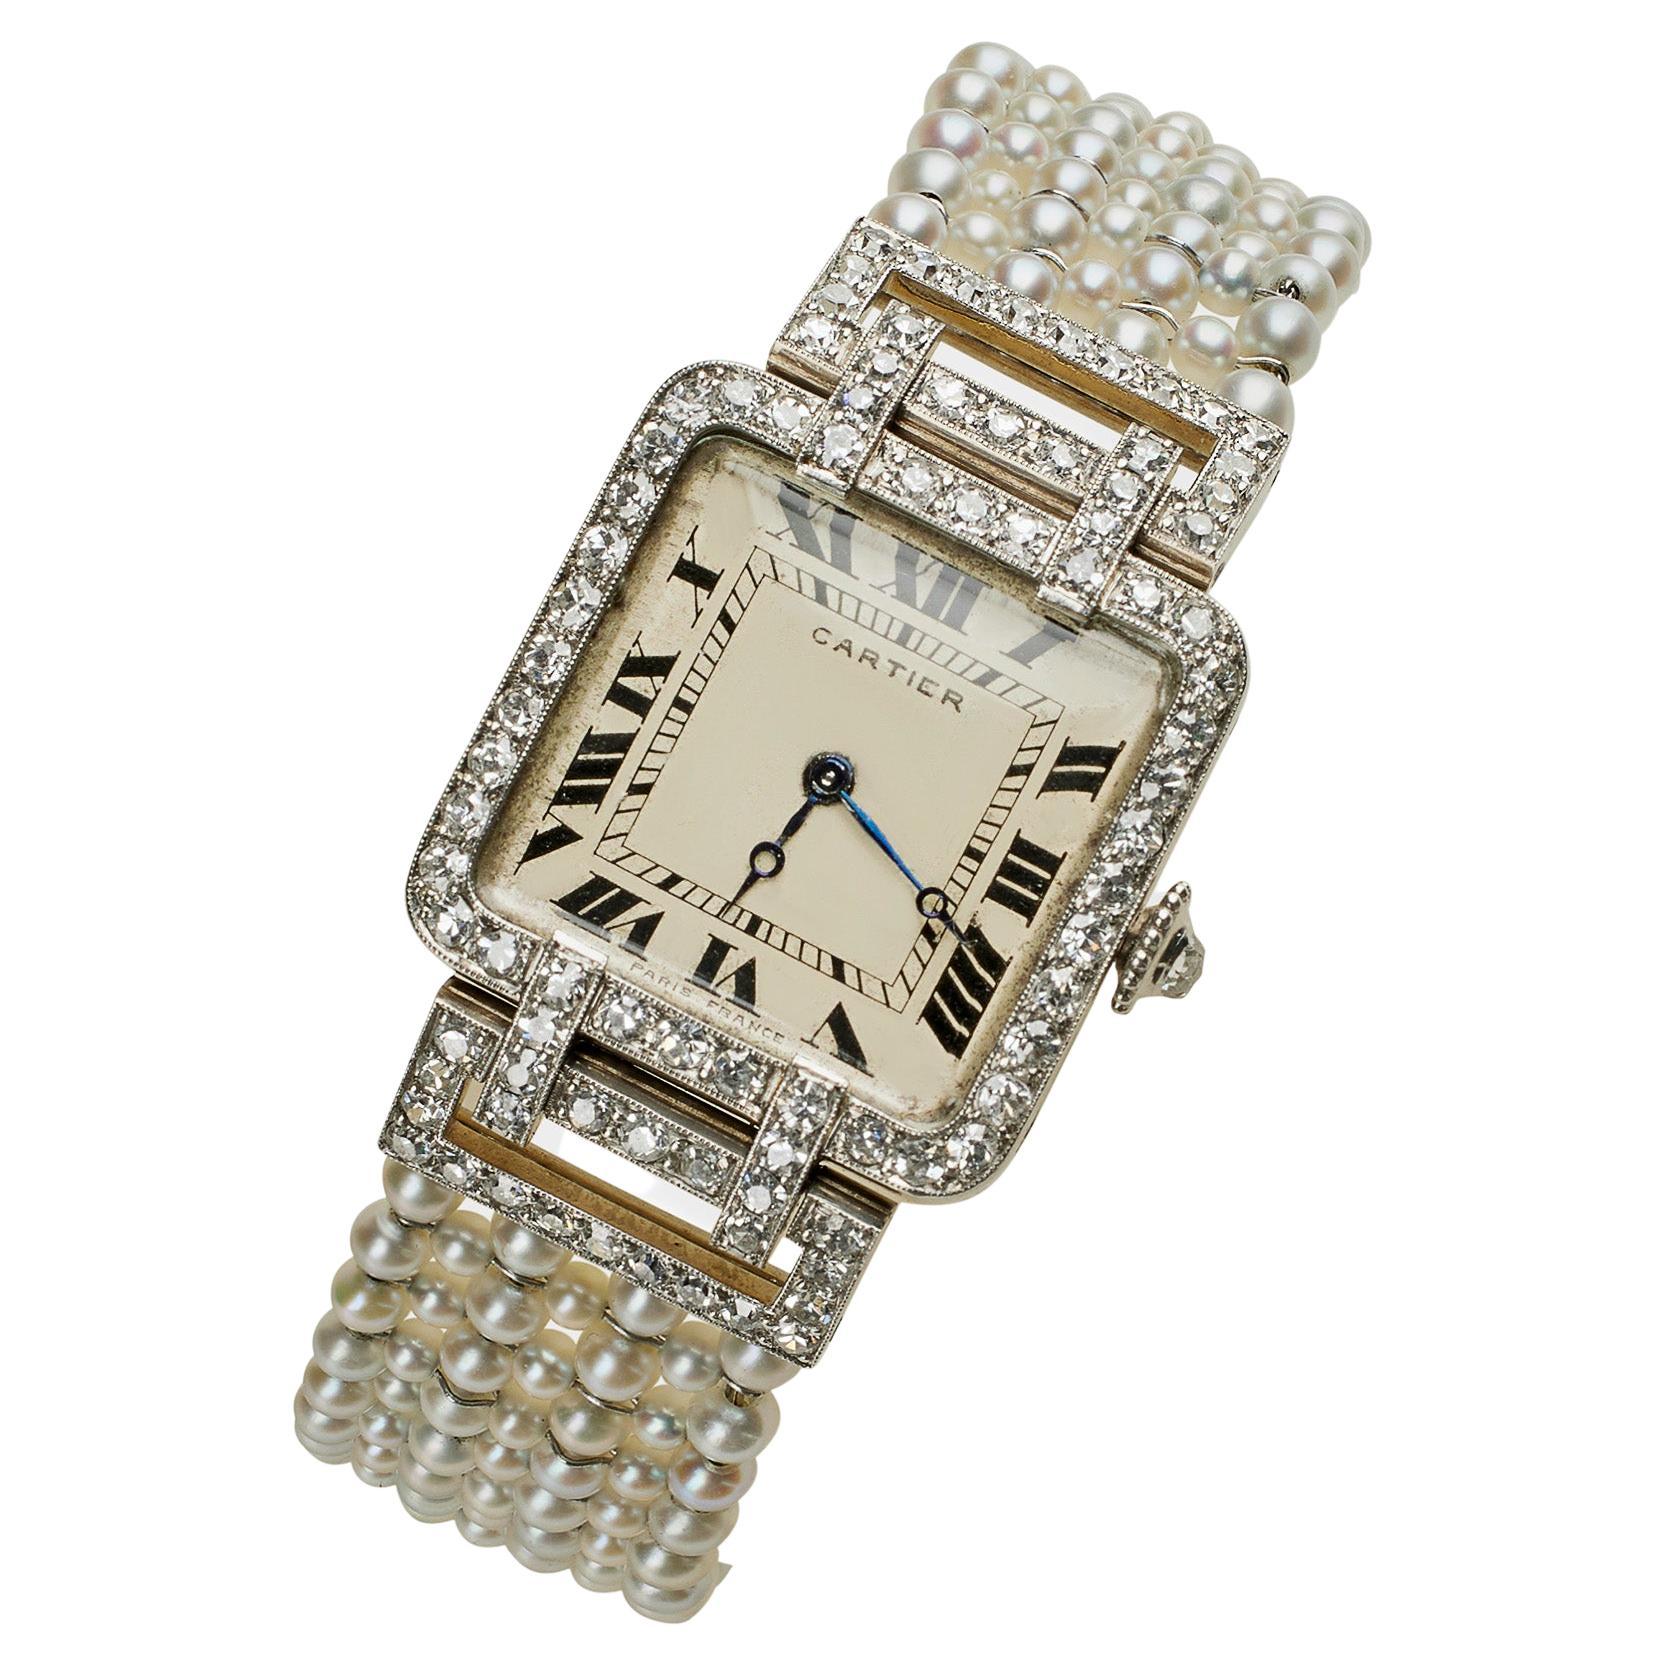 Cartier Paris and Edmond Jaeger Seed Pearl and Diamond Wristwatch